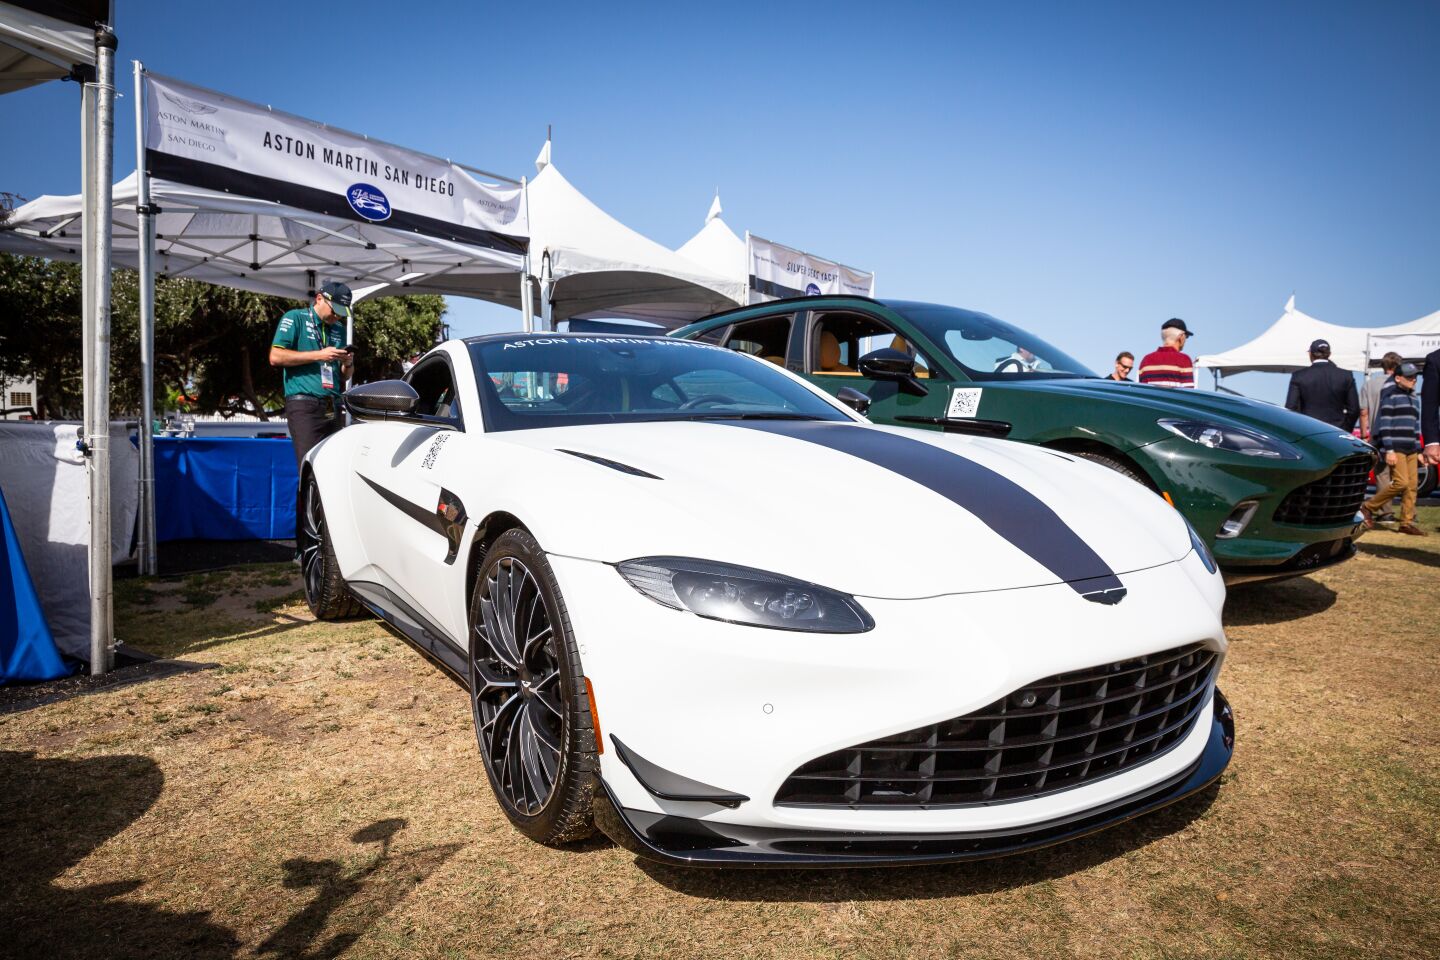 Could these Aston Martins be waiting for James Bond to arrive?